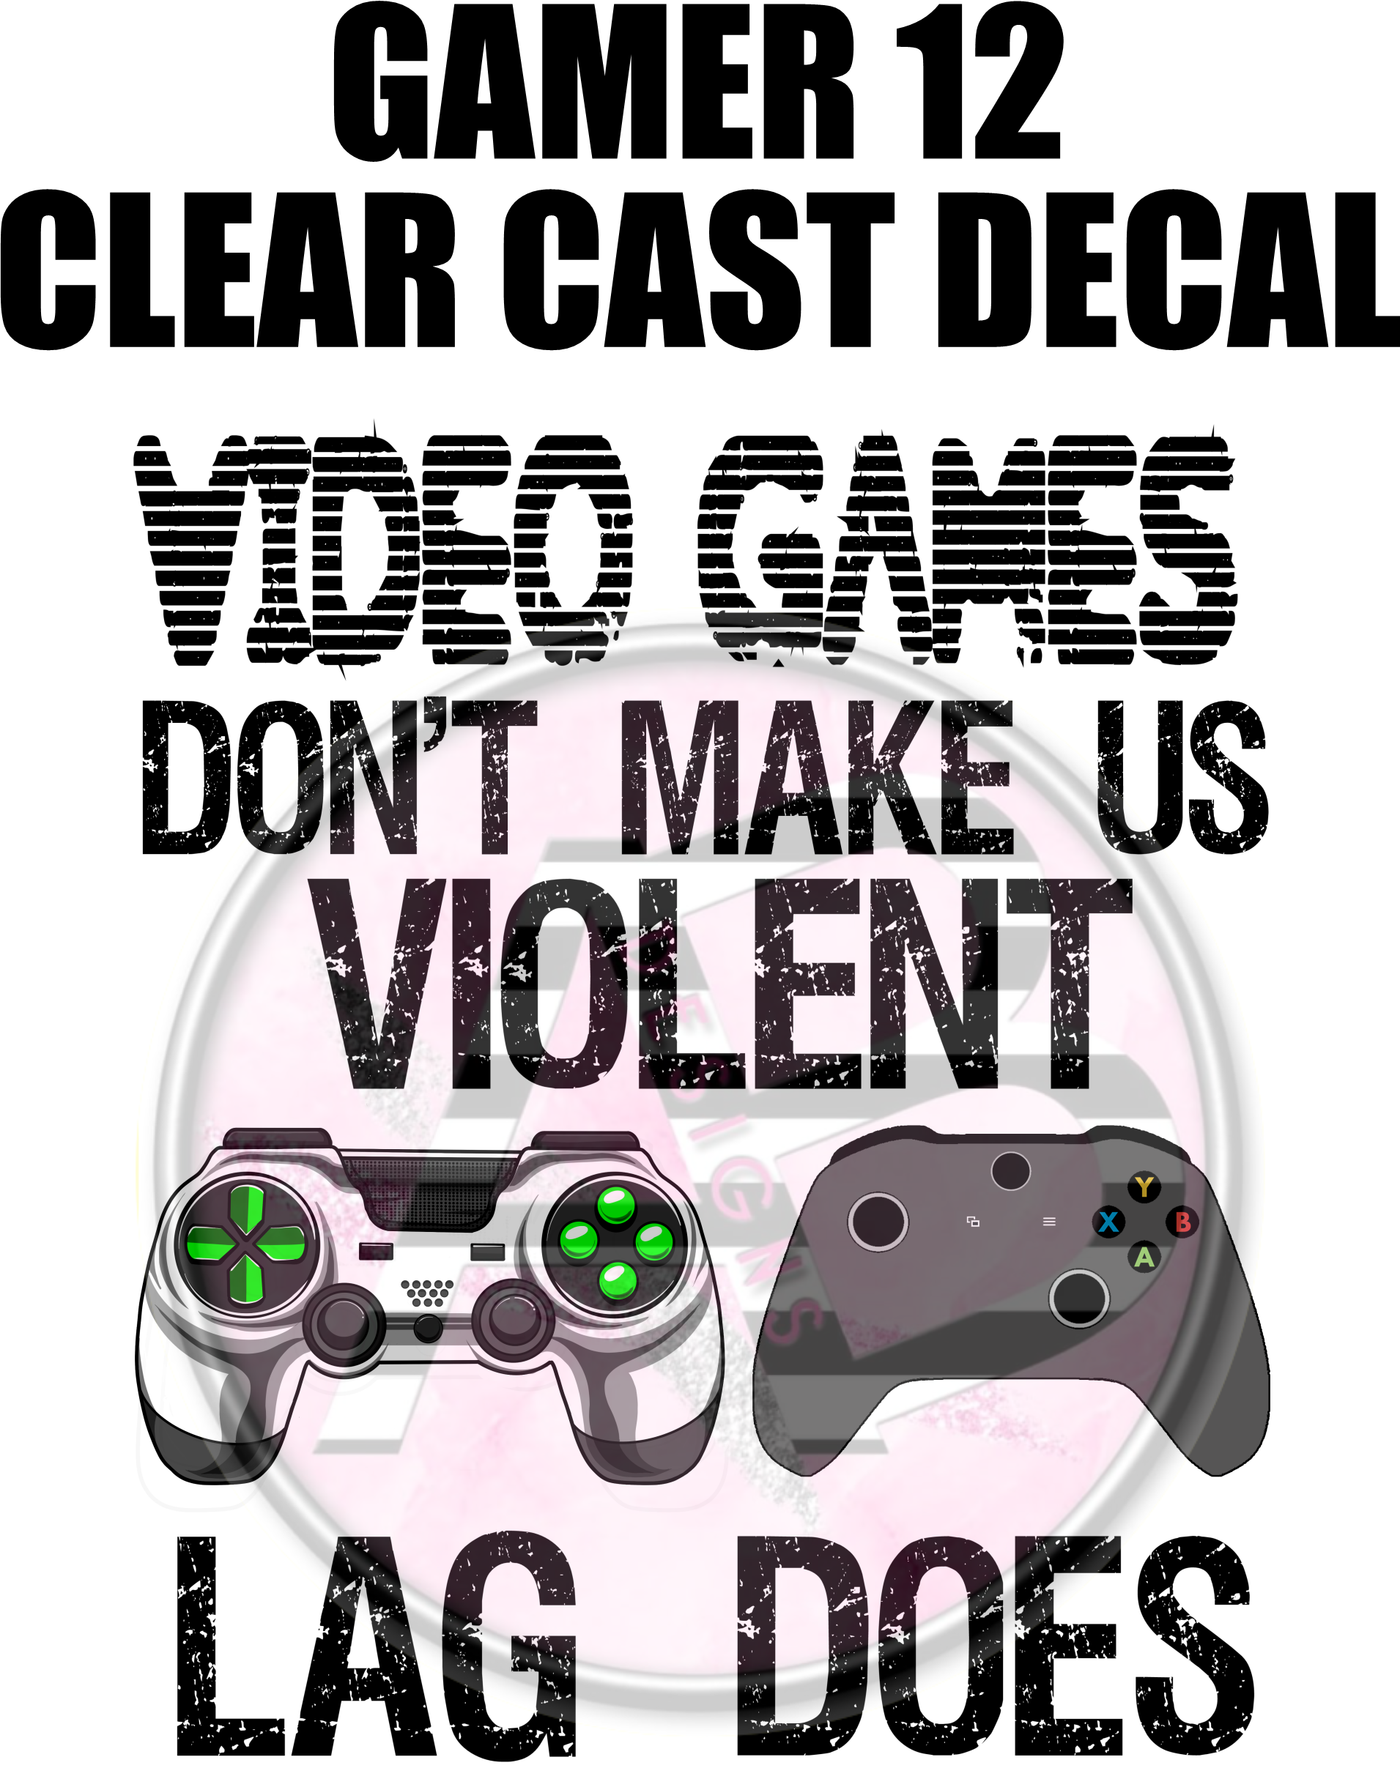 Gamer 12 - Clear Cast Decal